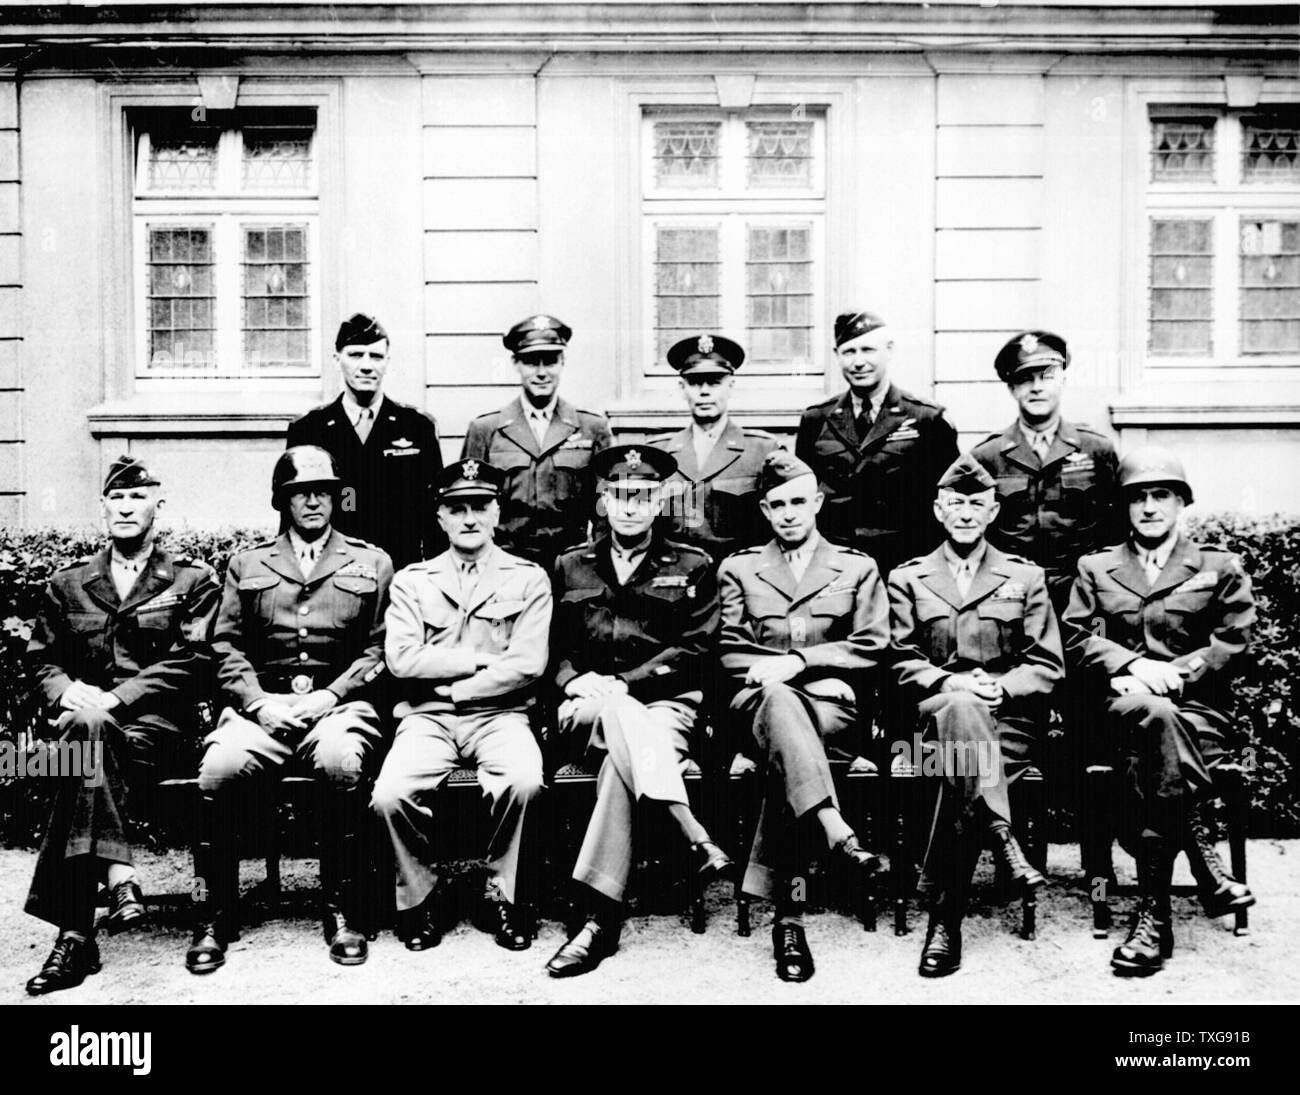 Senior American military officers during World War II.  Seated left to right : Generals William H. Simpson, George S. Patton, Carl A. Spaatz, Dwight D. Eisenhower, Omar Bradley, Courtney H. Hodges, and Leonard T. Gerow Stock Photo